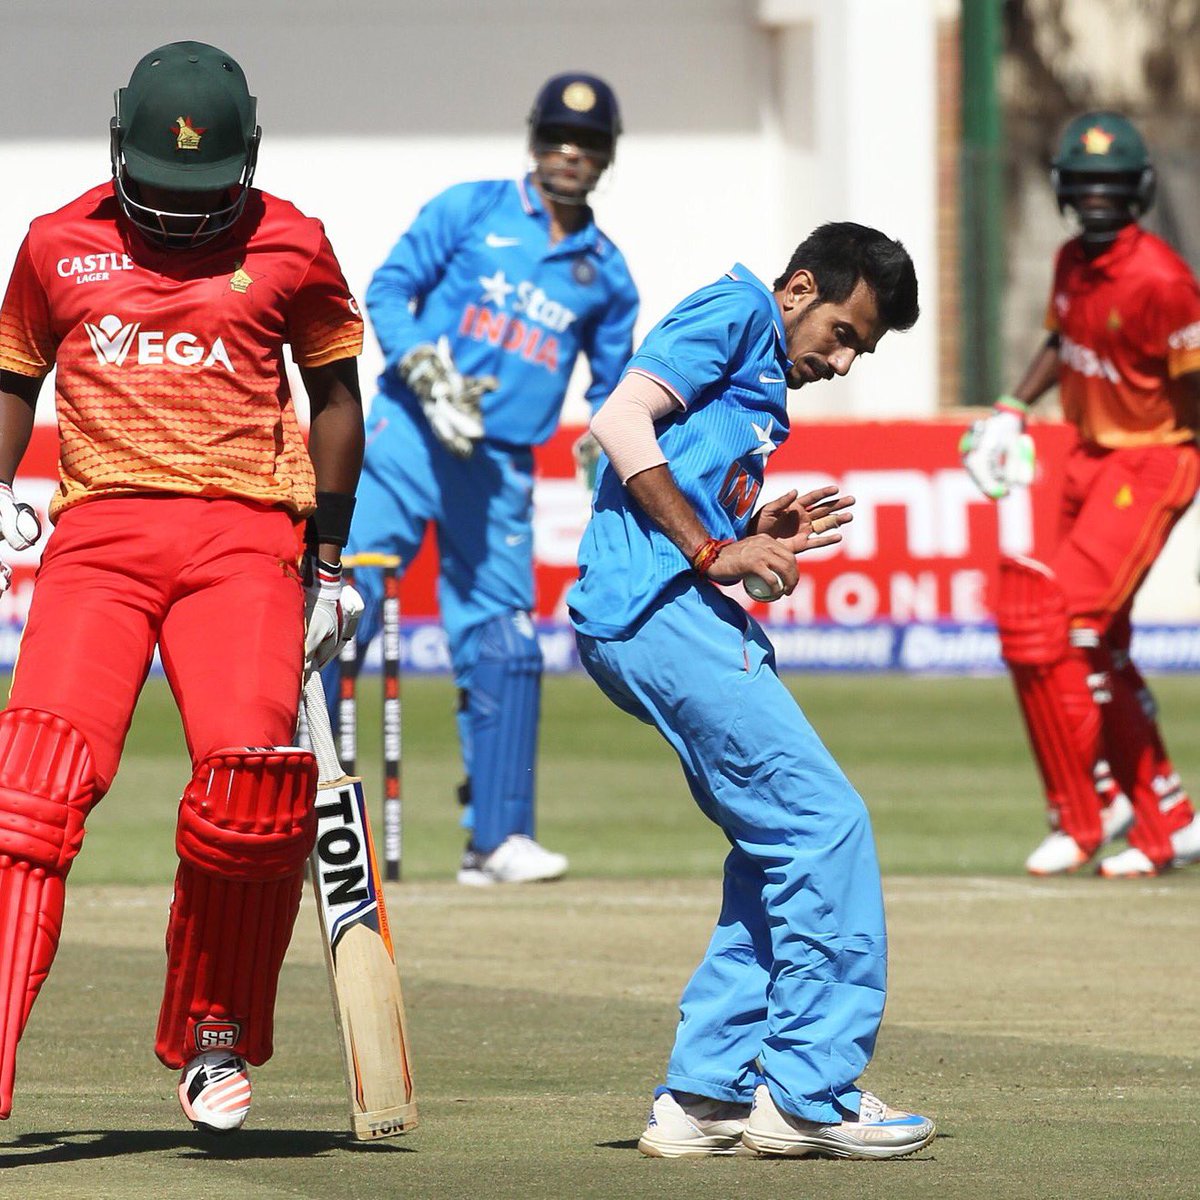 India suffer shock defeat against Zimbabwe in first T20